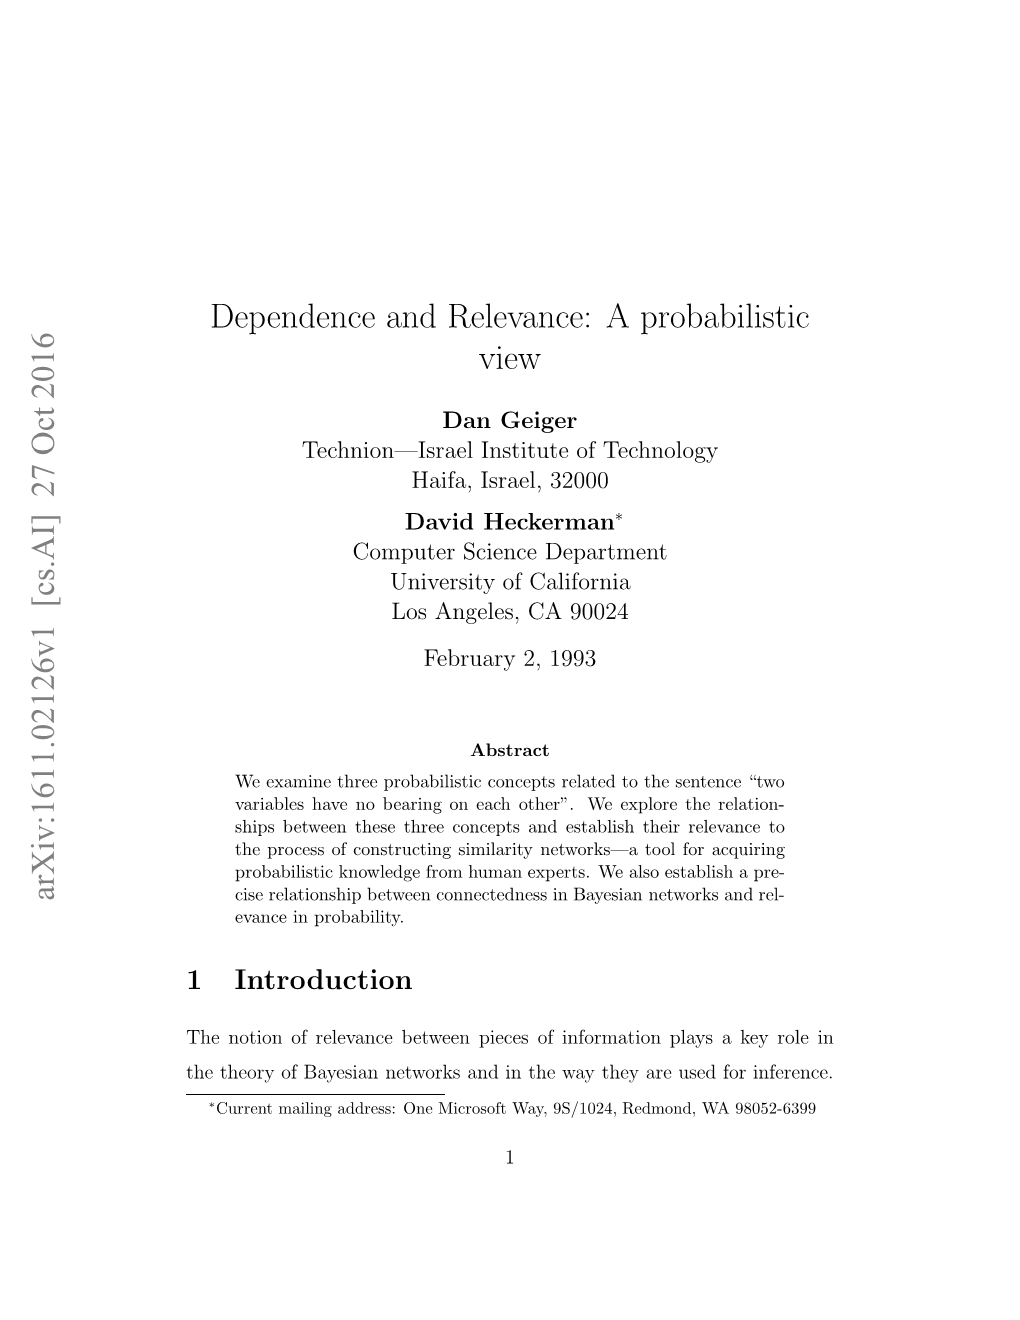 Dependence and Relevance: a Probabilistic View